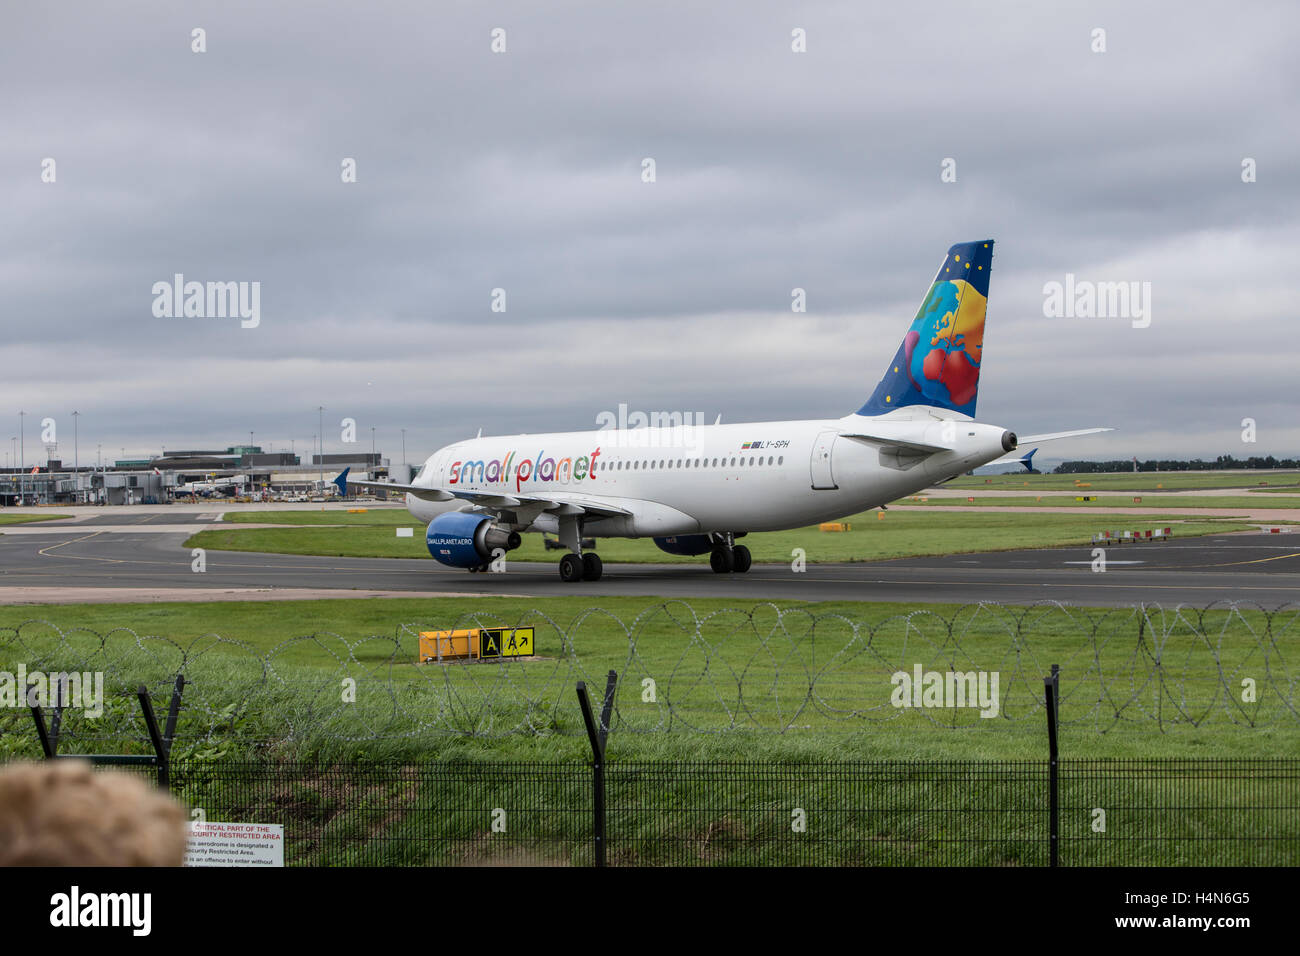 Small Planet Airbus A320-214 Aeroplane at Manchester Ringways Airport Stock Photo